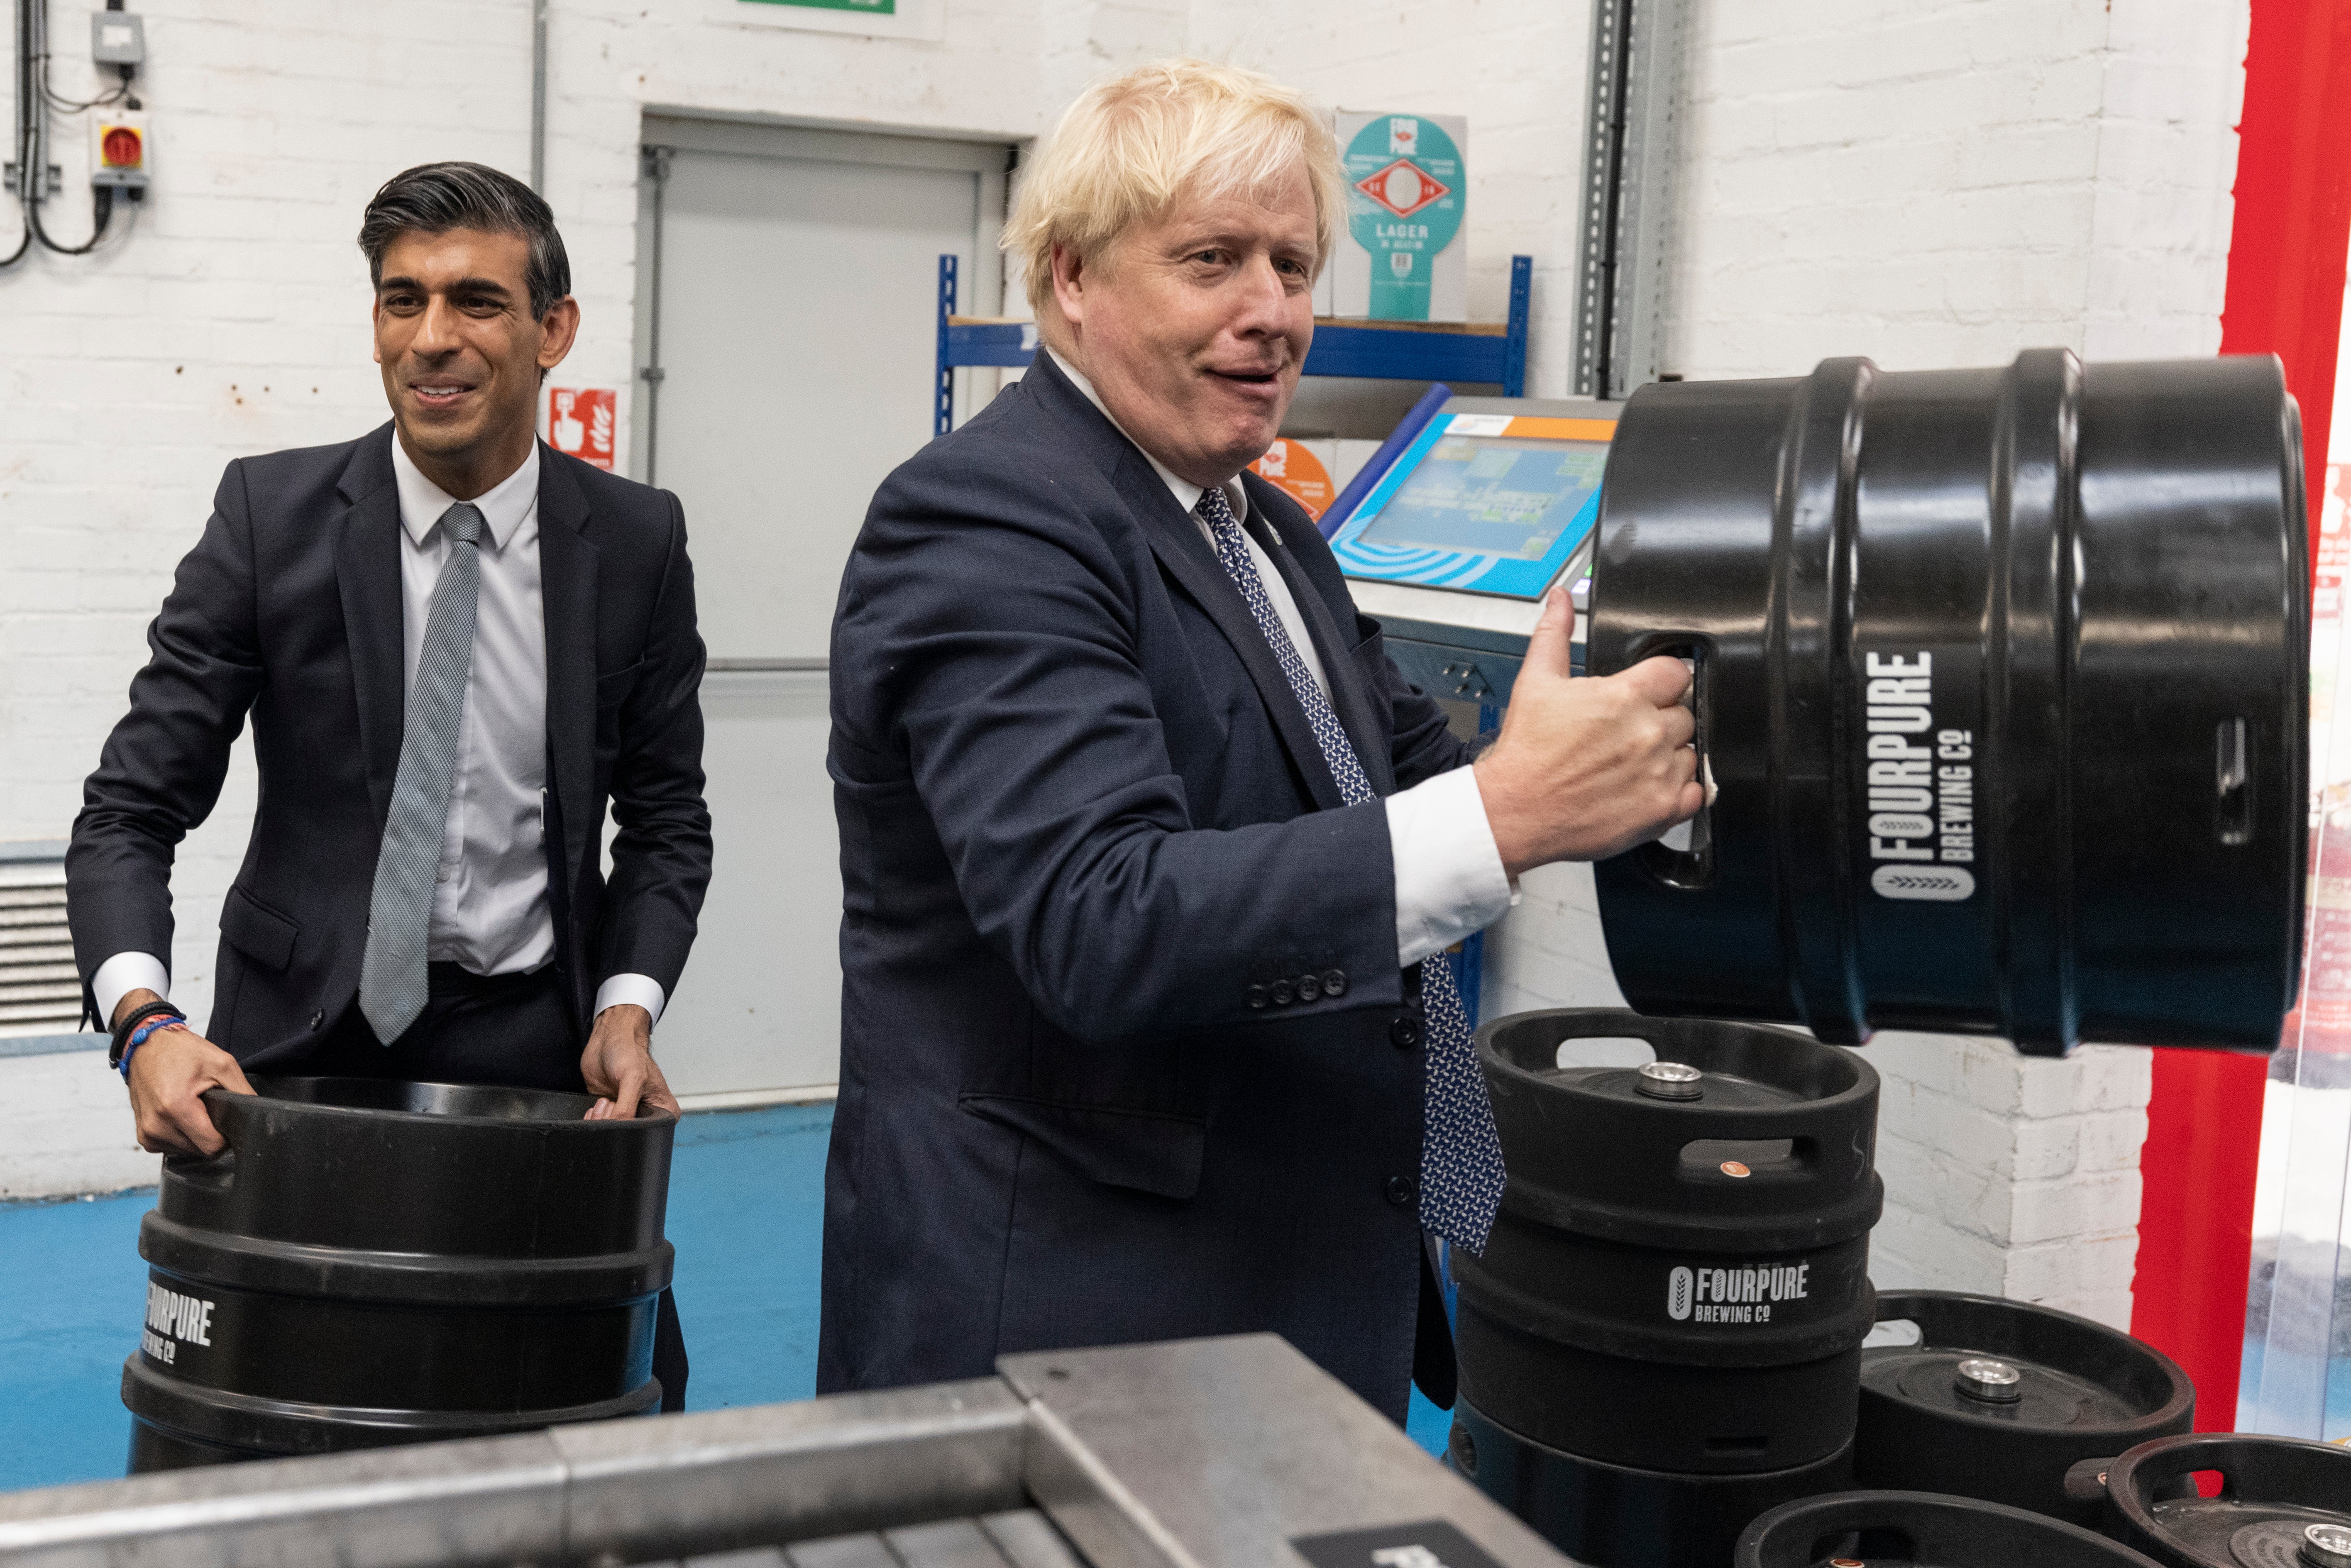 Boris Johnson still has to wait for the police to tell him exactly what he’s been done for, because he knows there are too many incidents to choose from